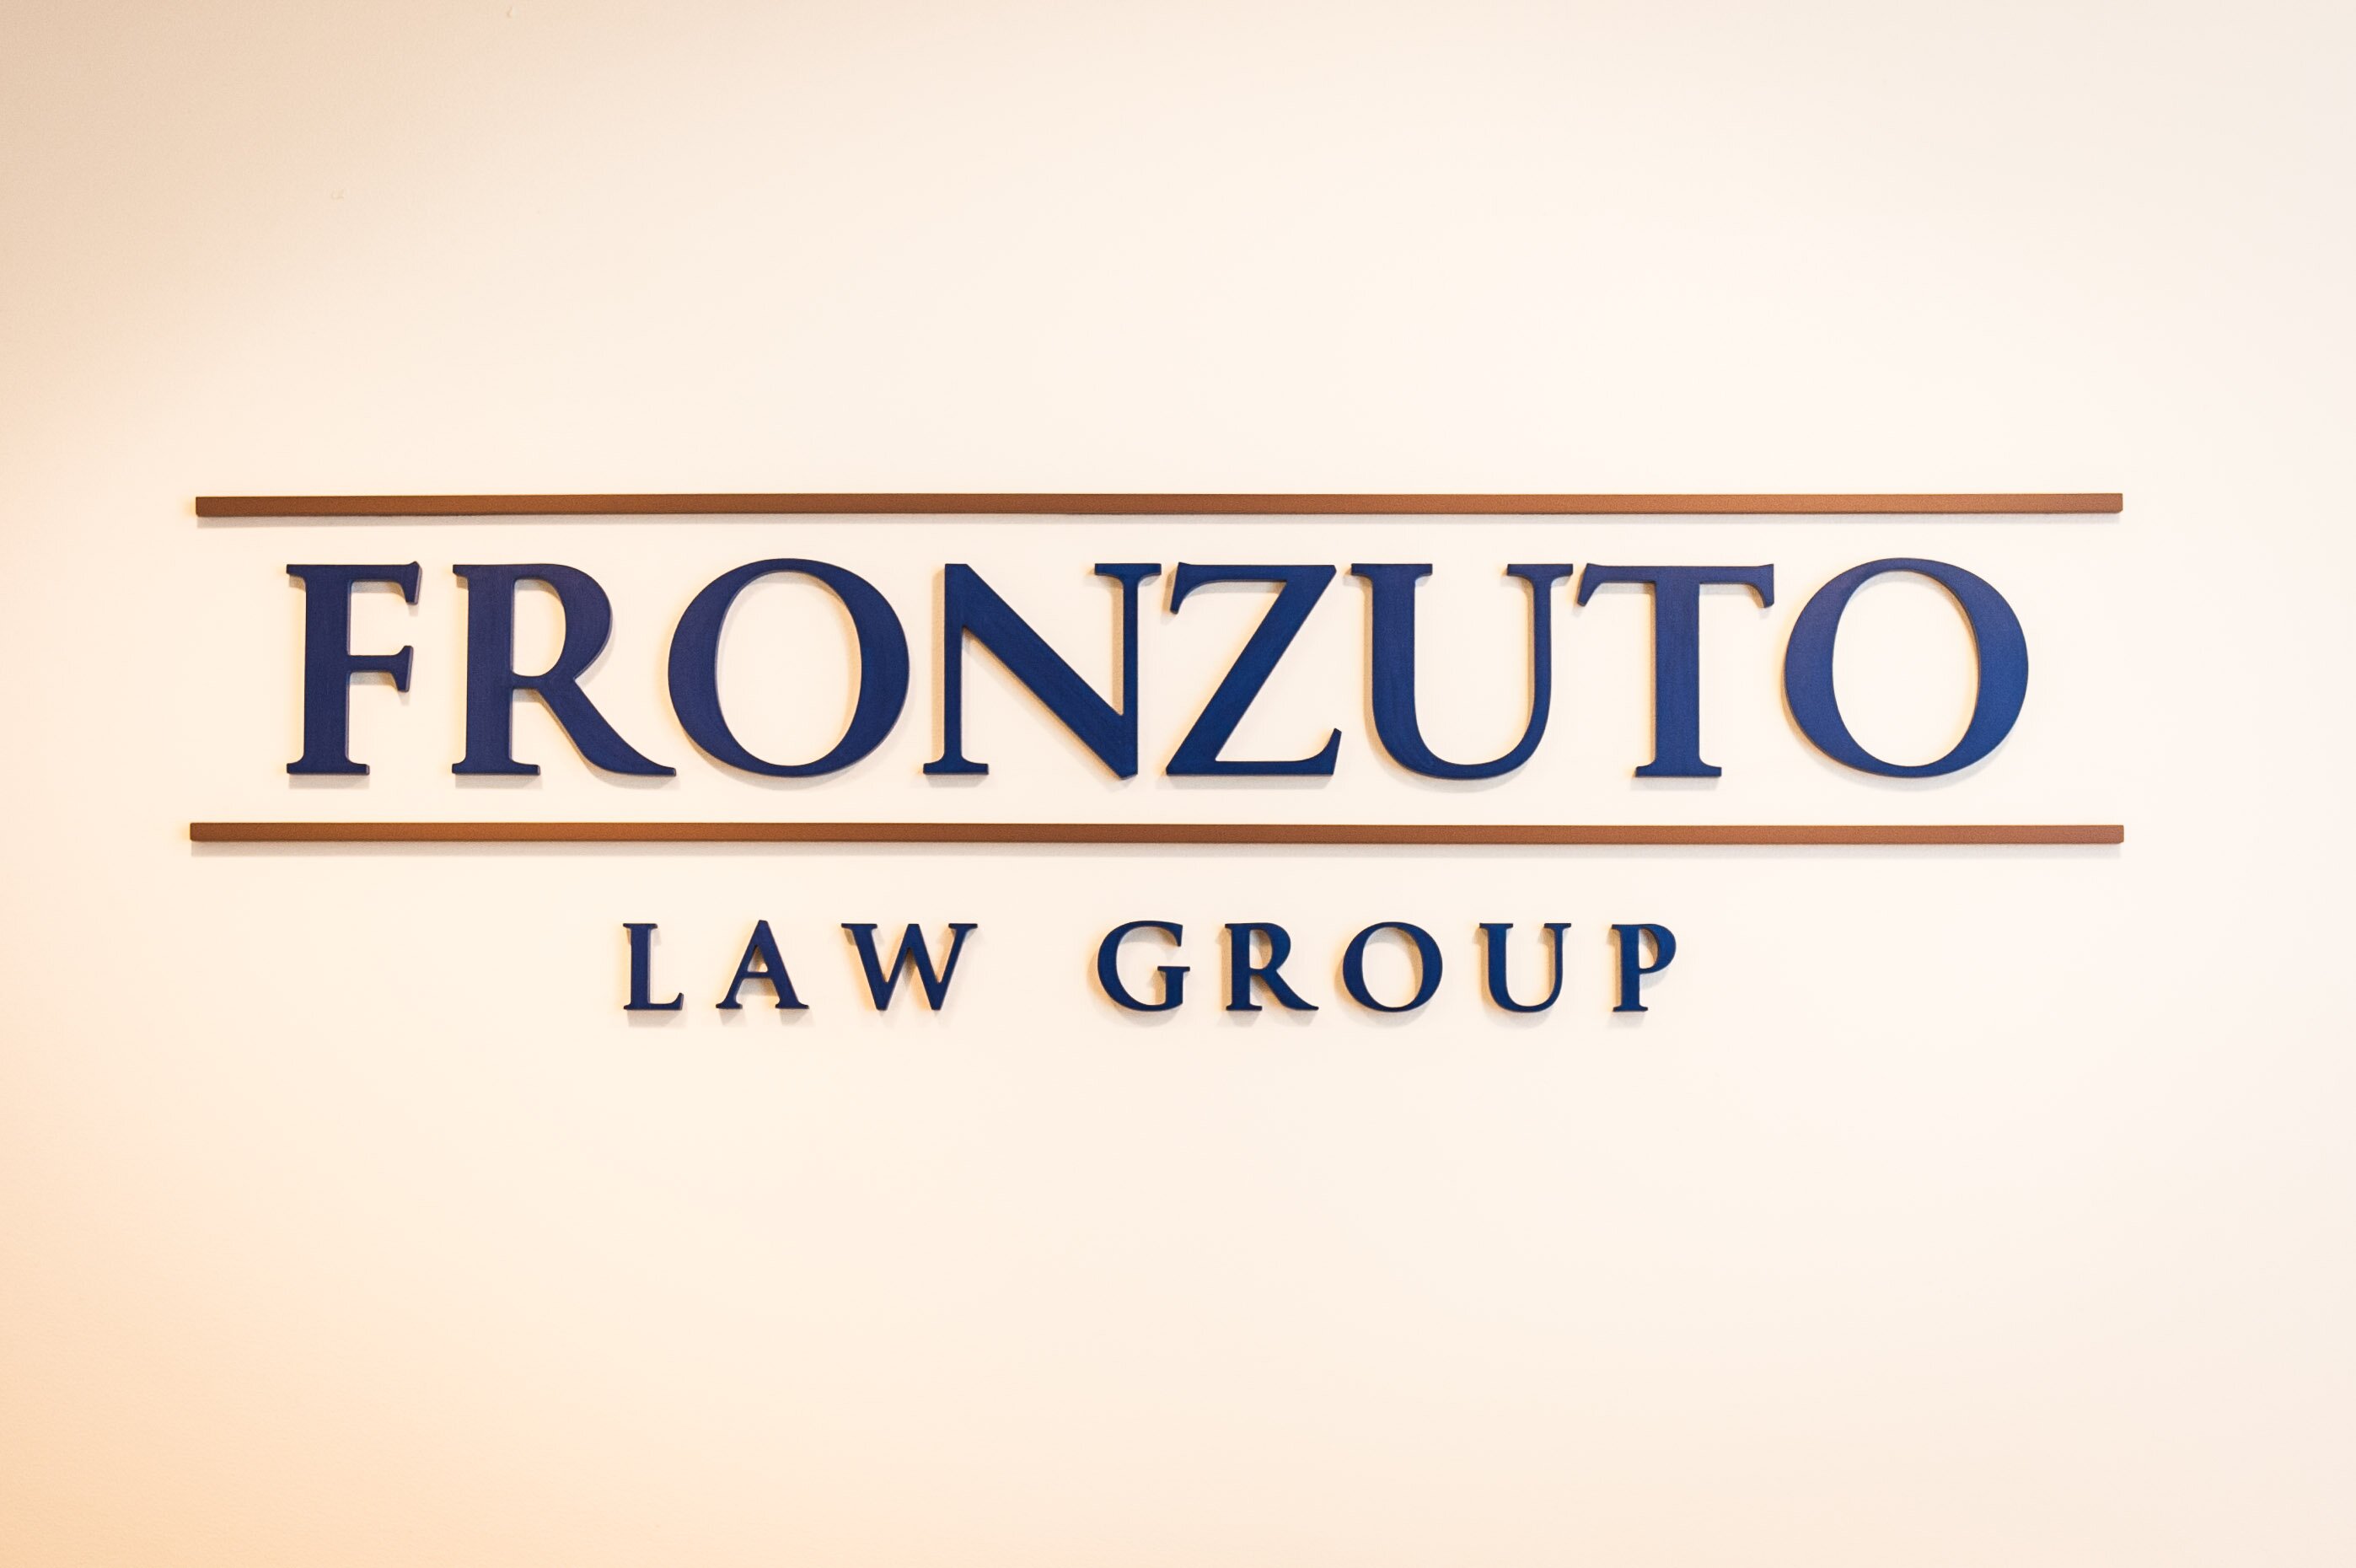 Fronzuto Law Group is a complex civil litigation firm specializing in medical malpractice, products liability, and catastrophic injuries.